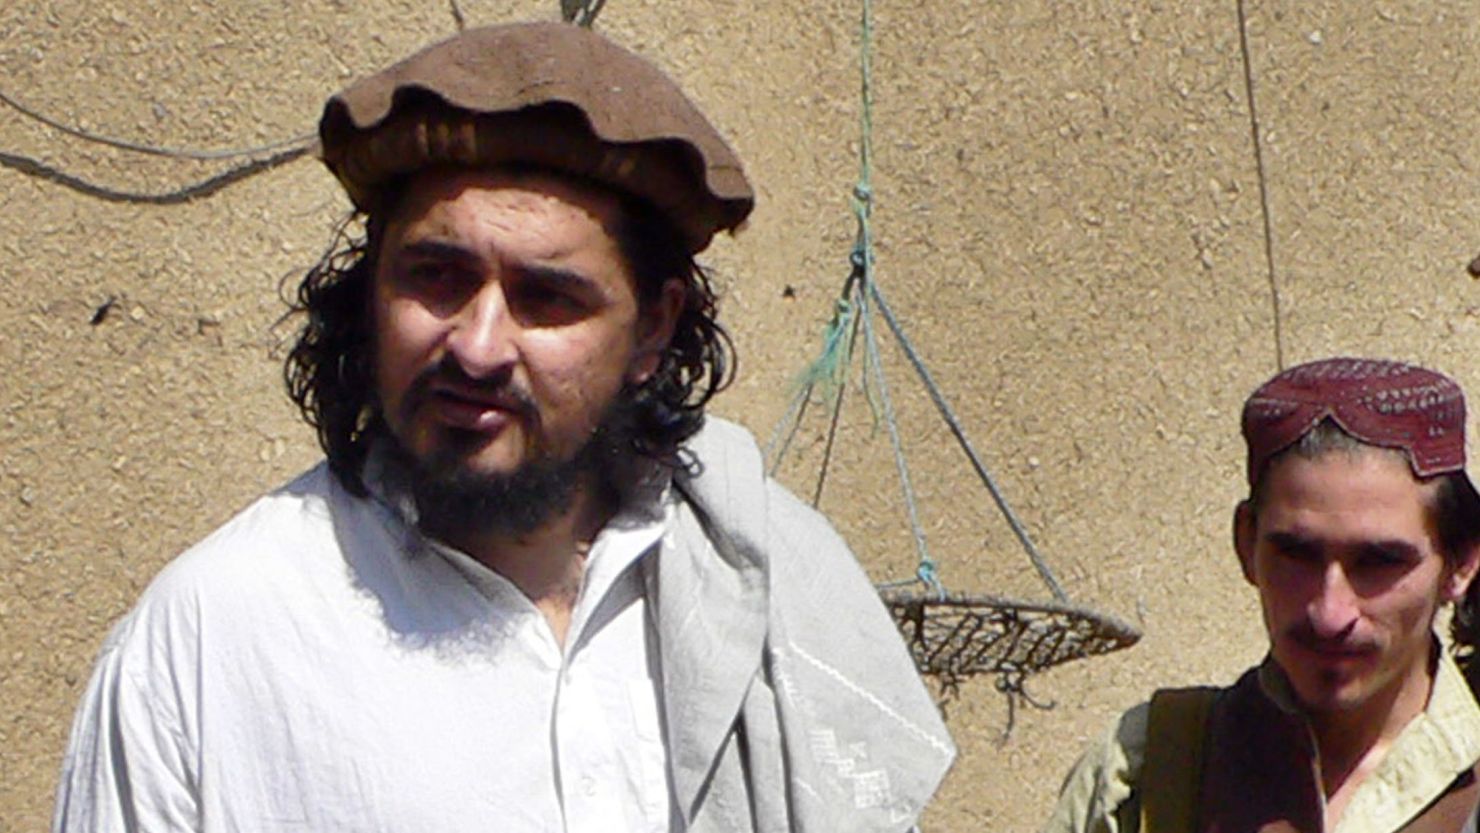 The Pakistani Taliban has been split since the death of leader Hakimullah Mehsud (L) in a 2013 drone strike.